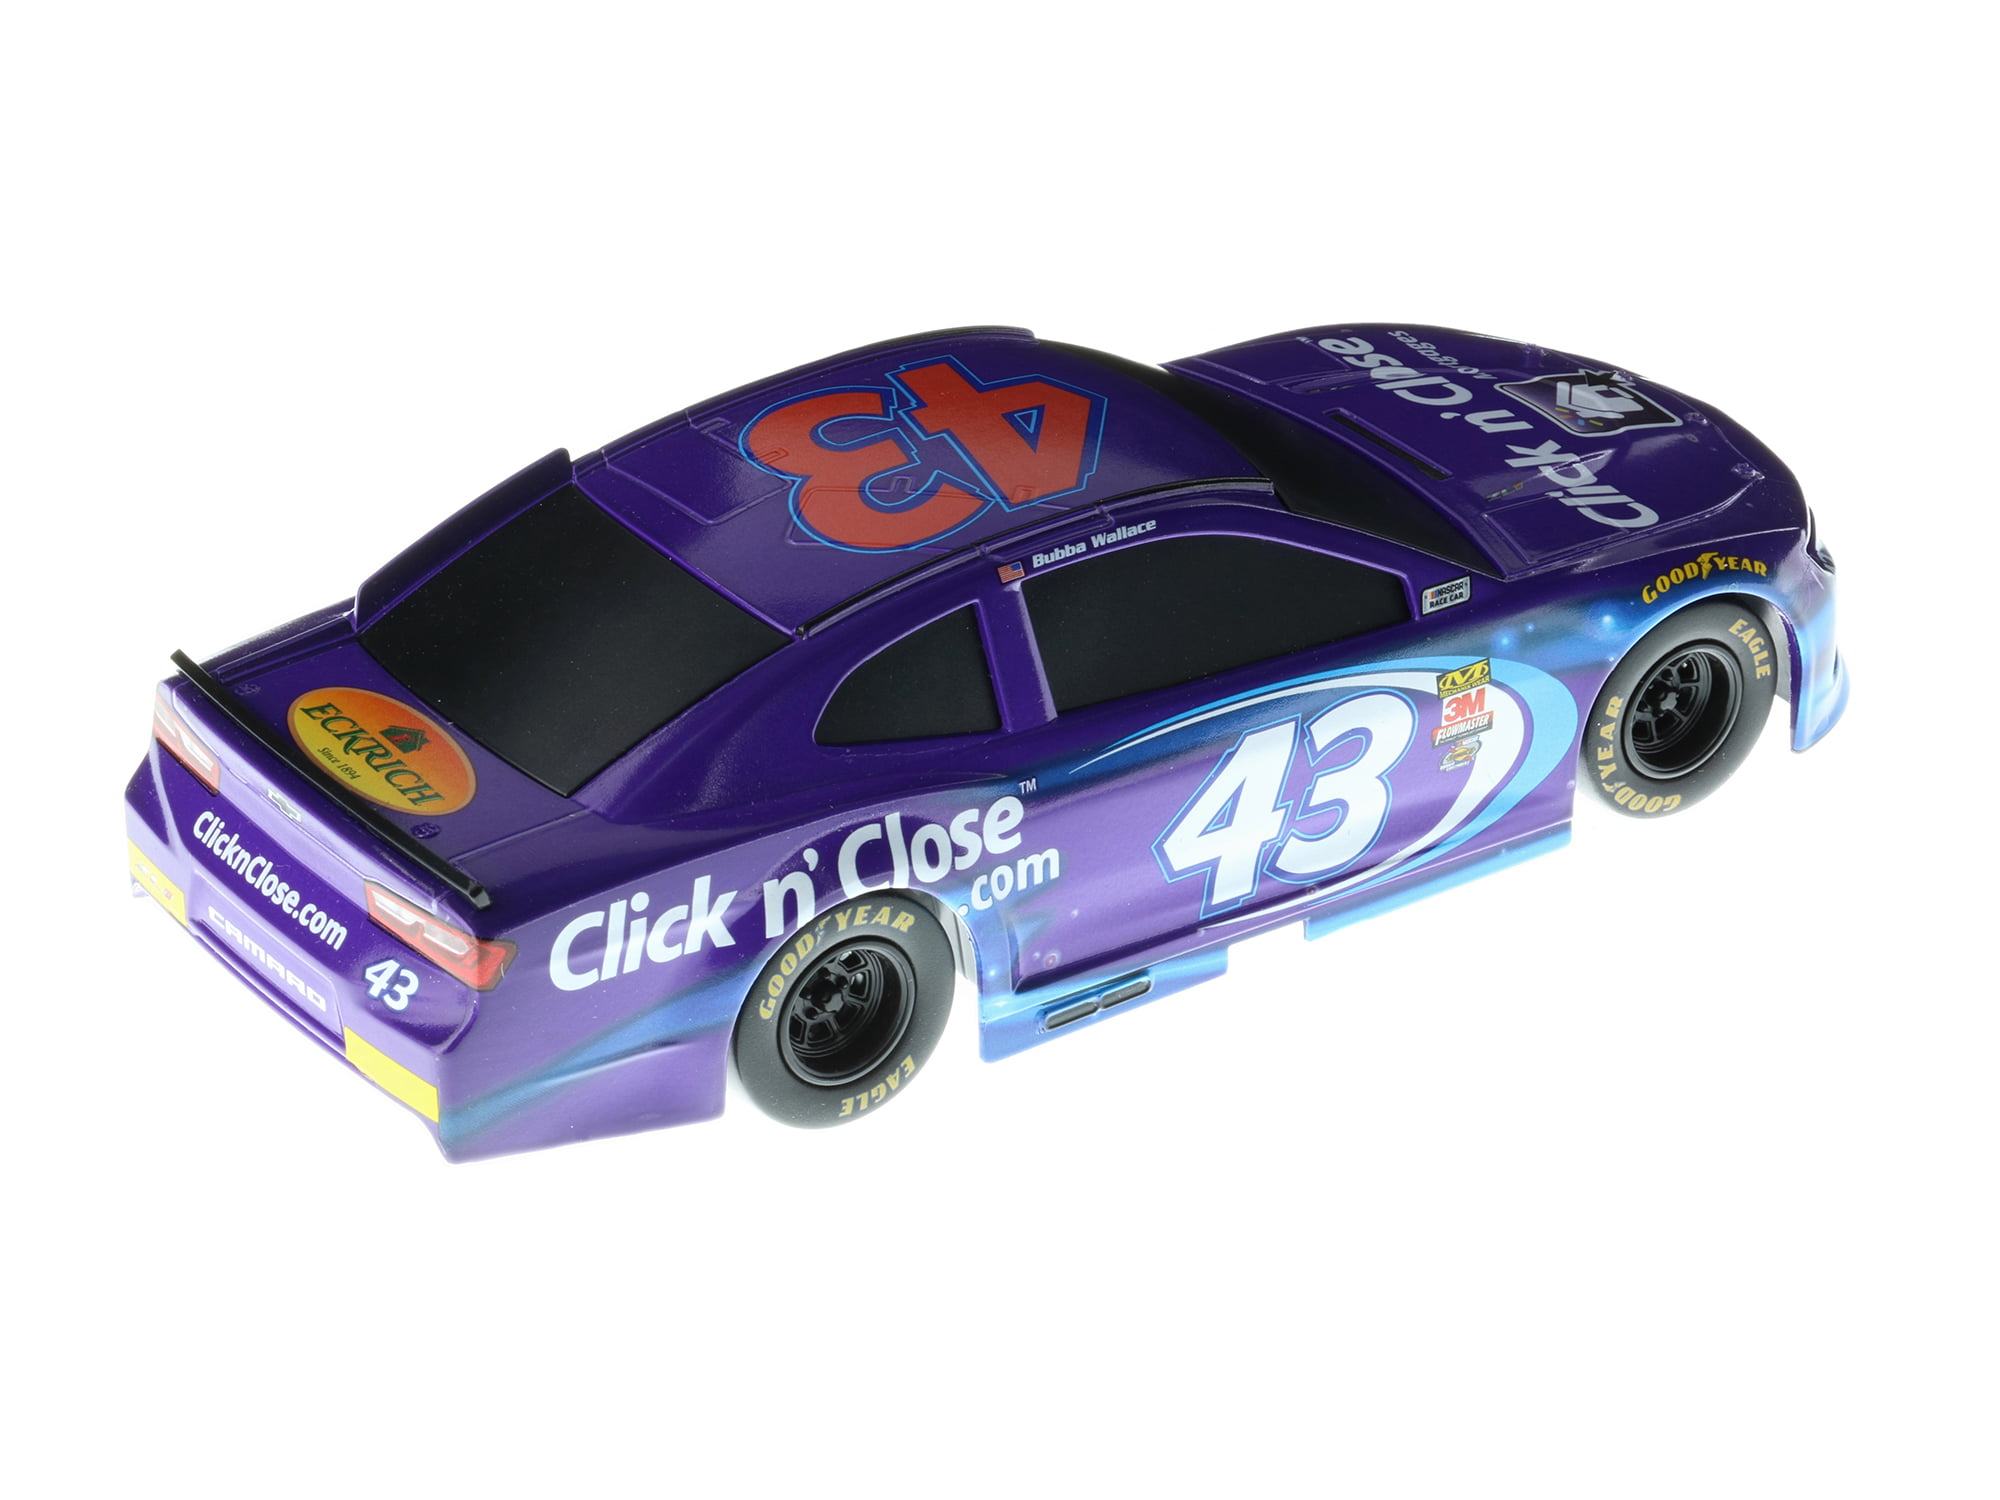 BUBBA WALLACE #43 2018 FOOD LION ELITE 1/24 SCALE NEW IN STOCK FREE SHIPPING 